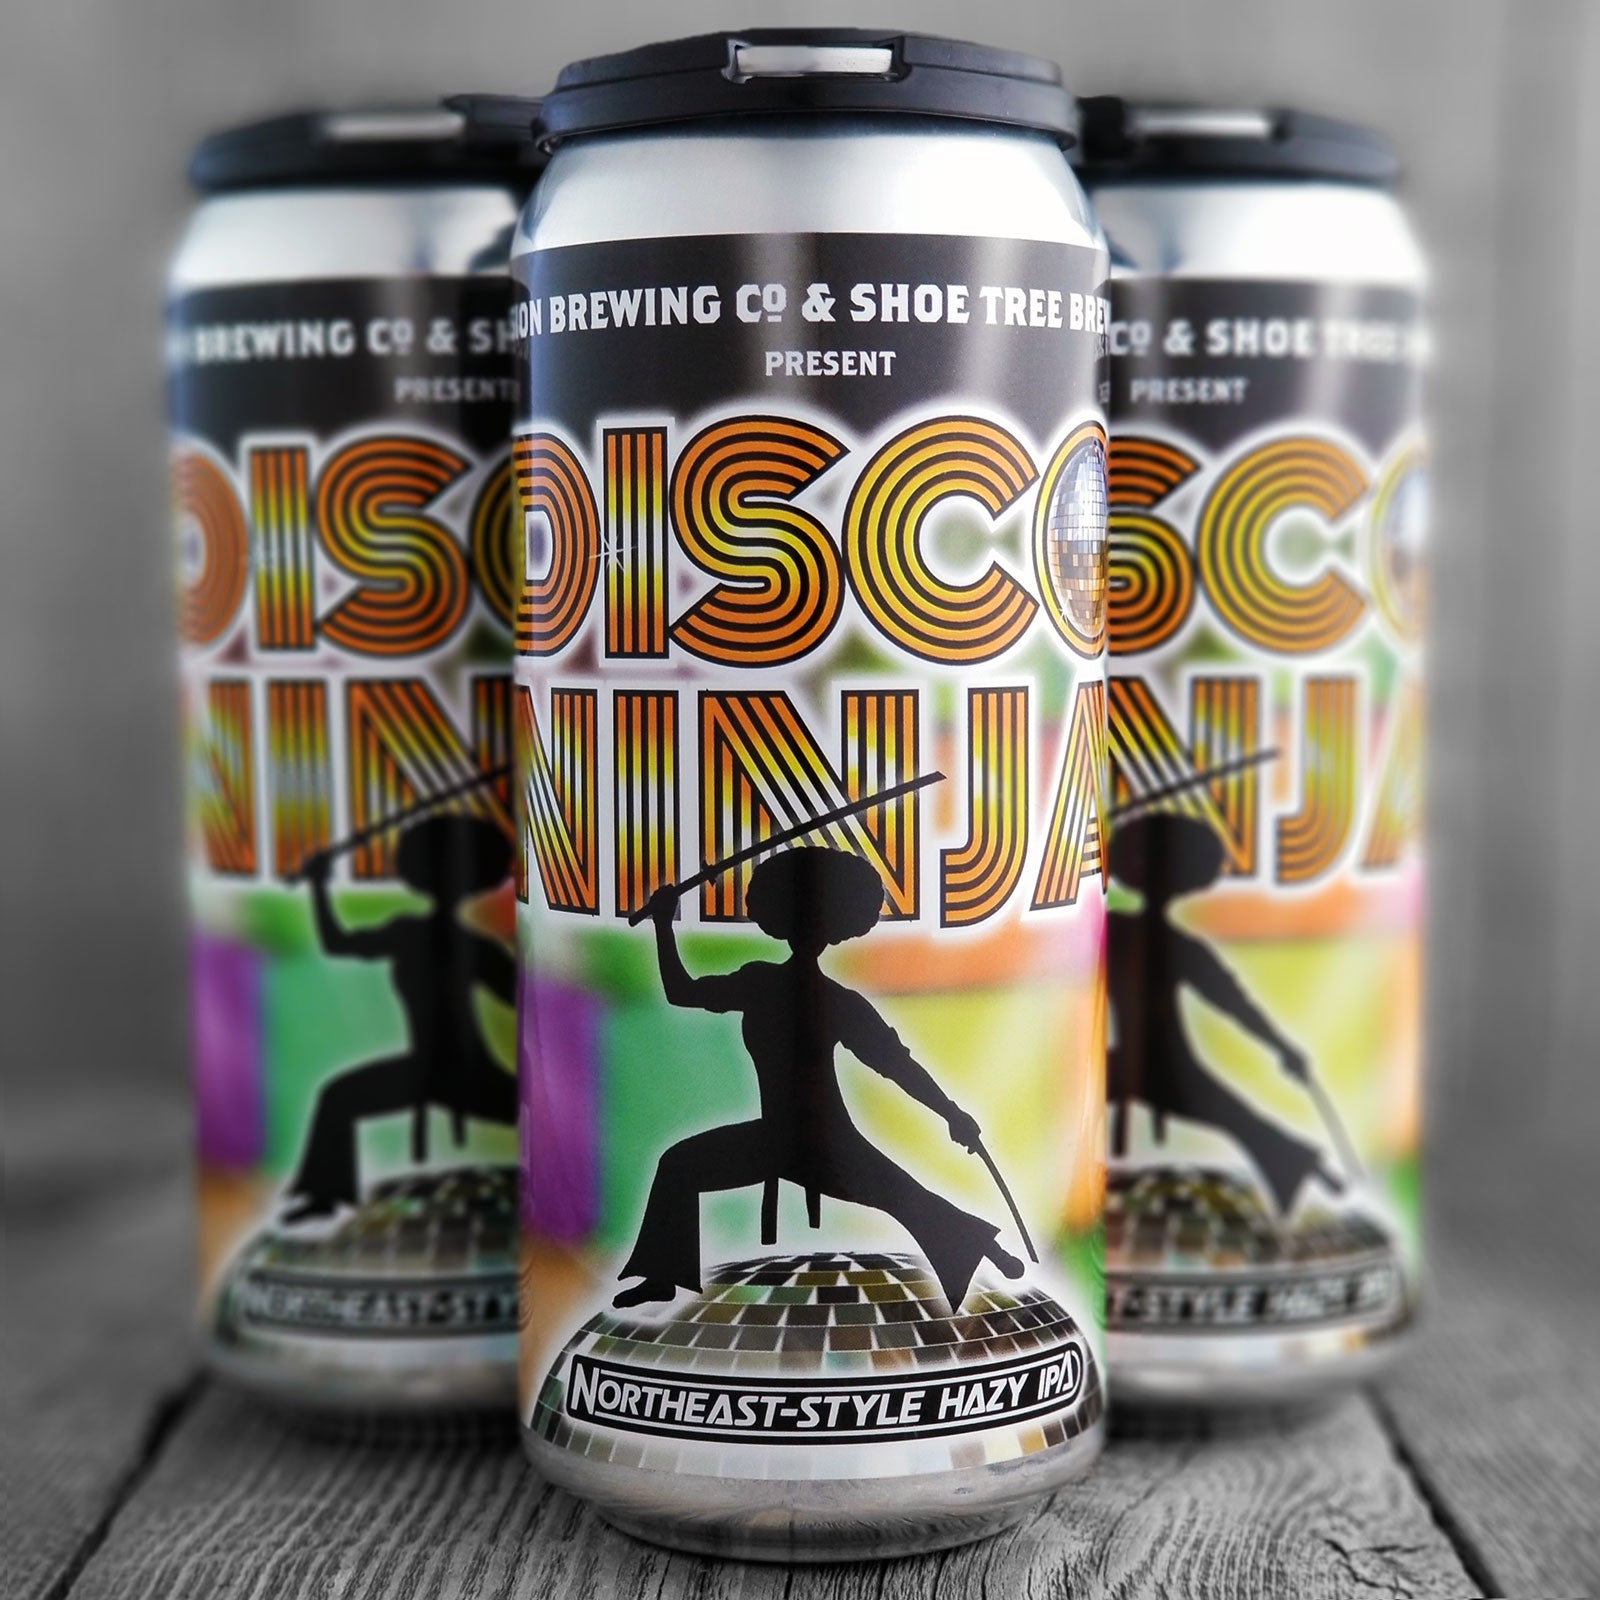 revision-disco-ninja-4pack-cans_2048x204